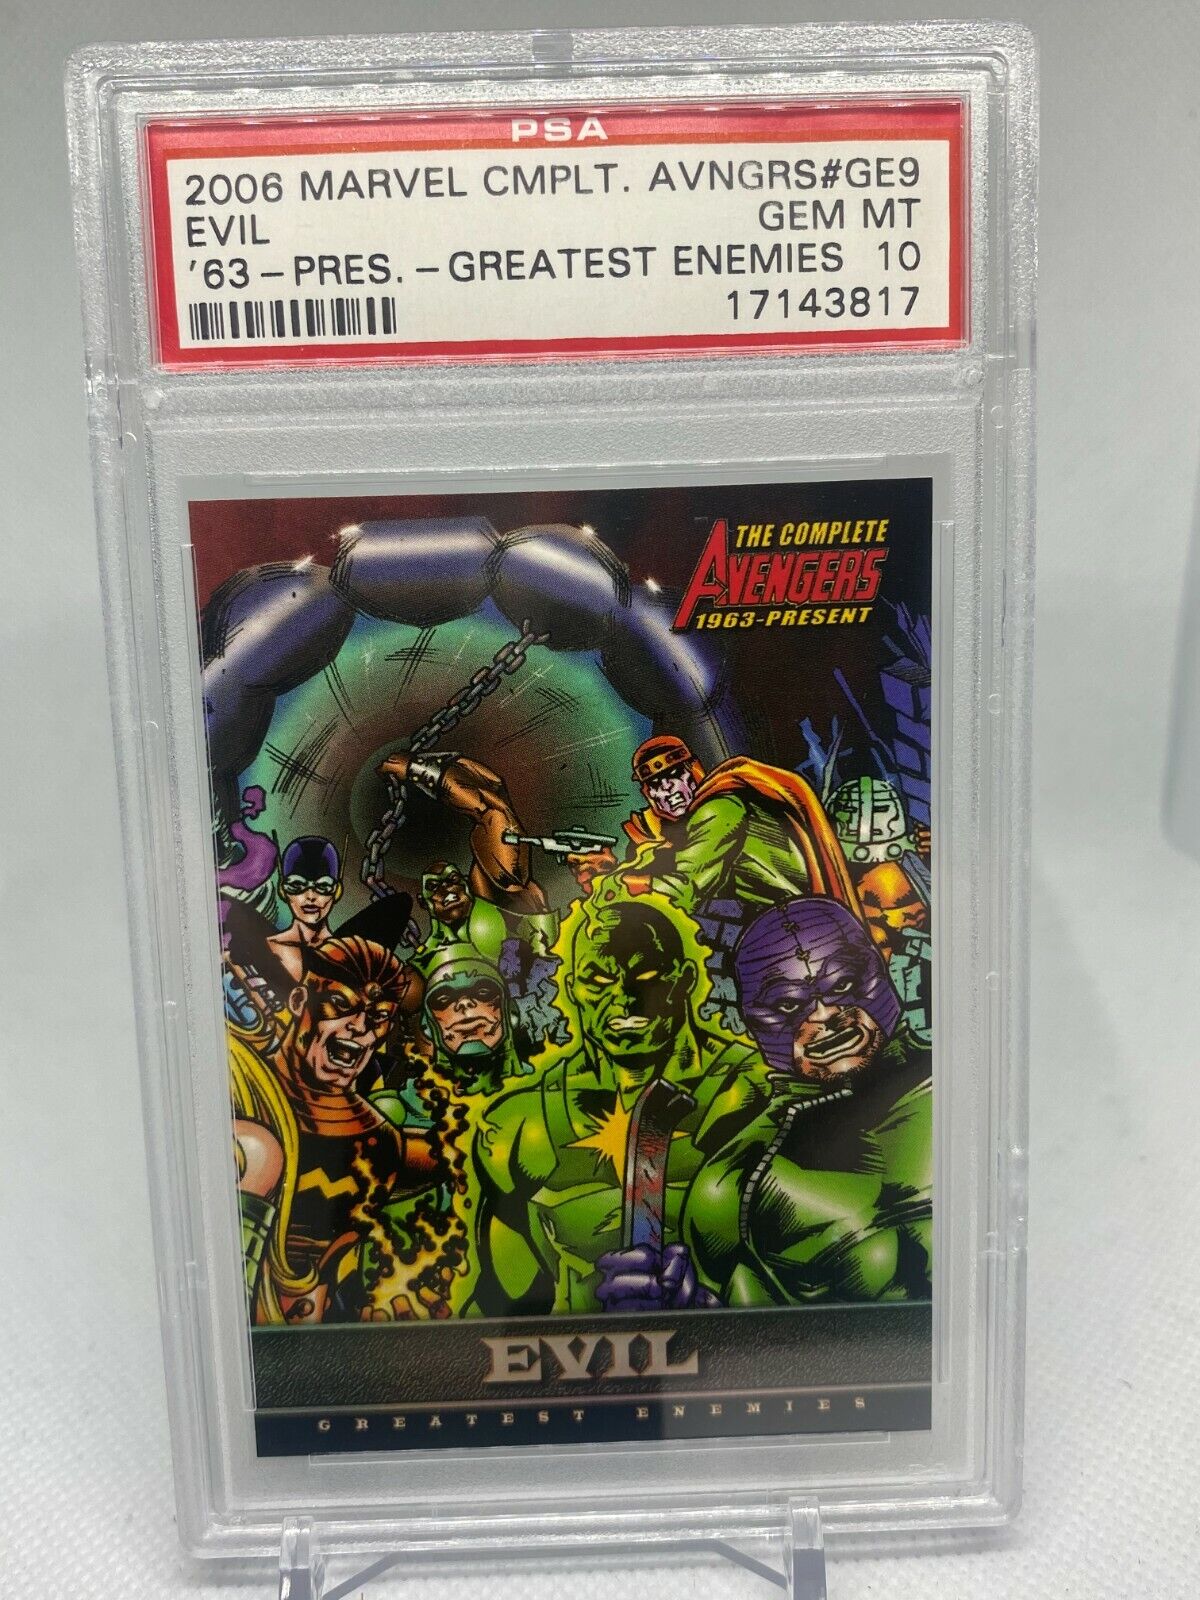 2006 Upper Deck Avengers Complete Greatest Enemies Chase Card - PSA 10 - Pop 1 